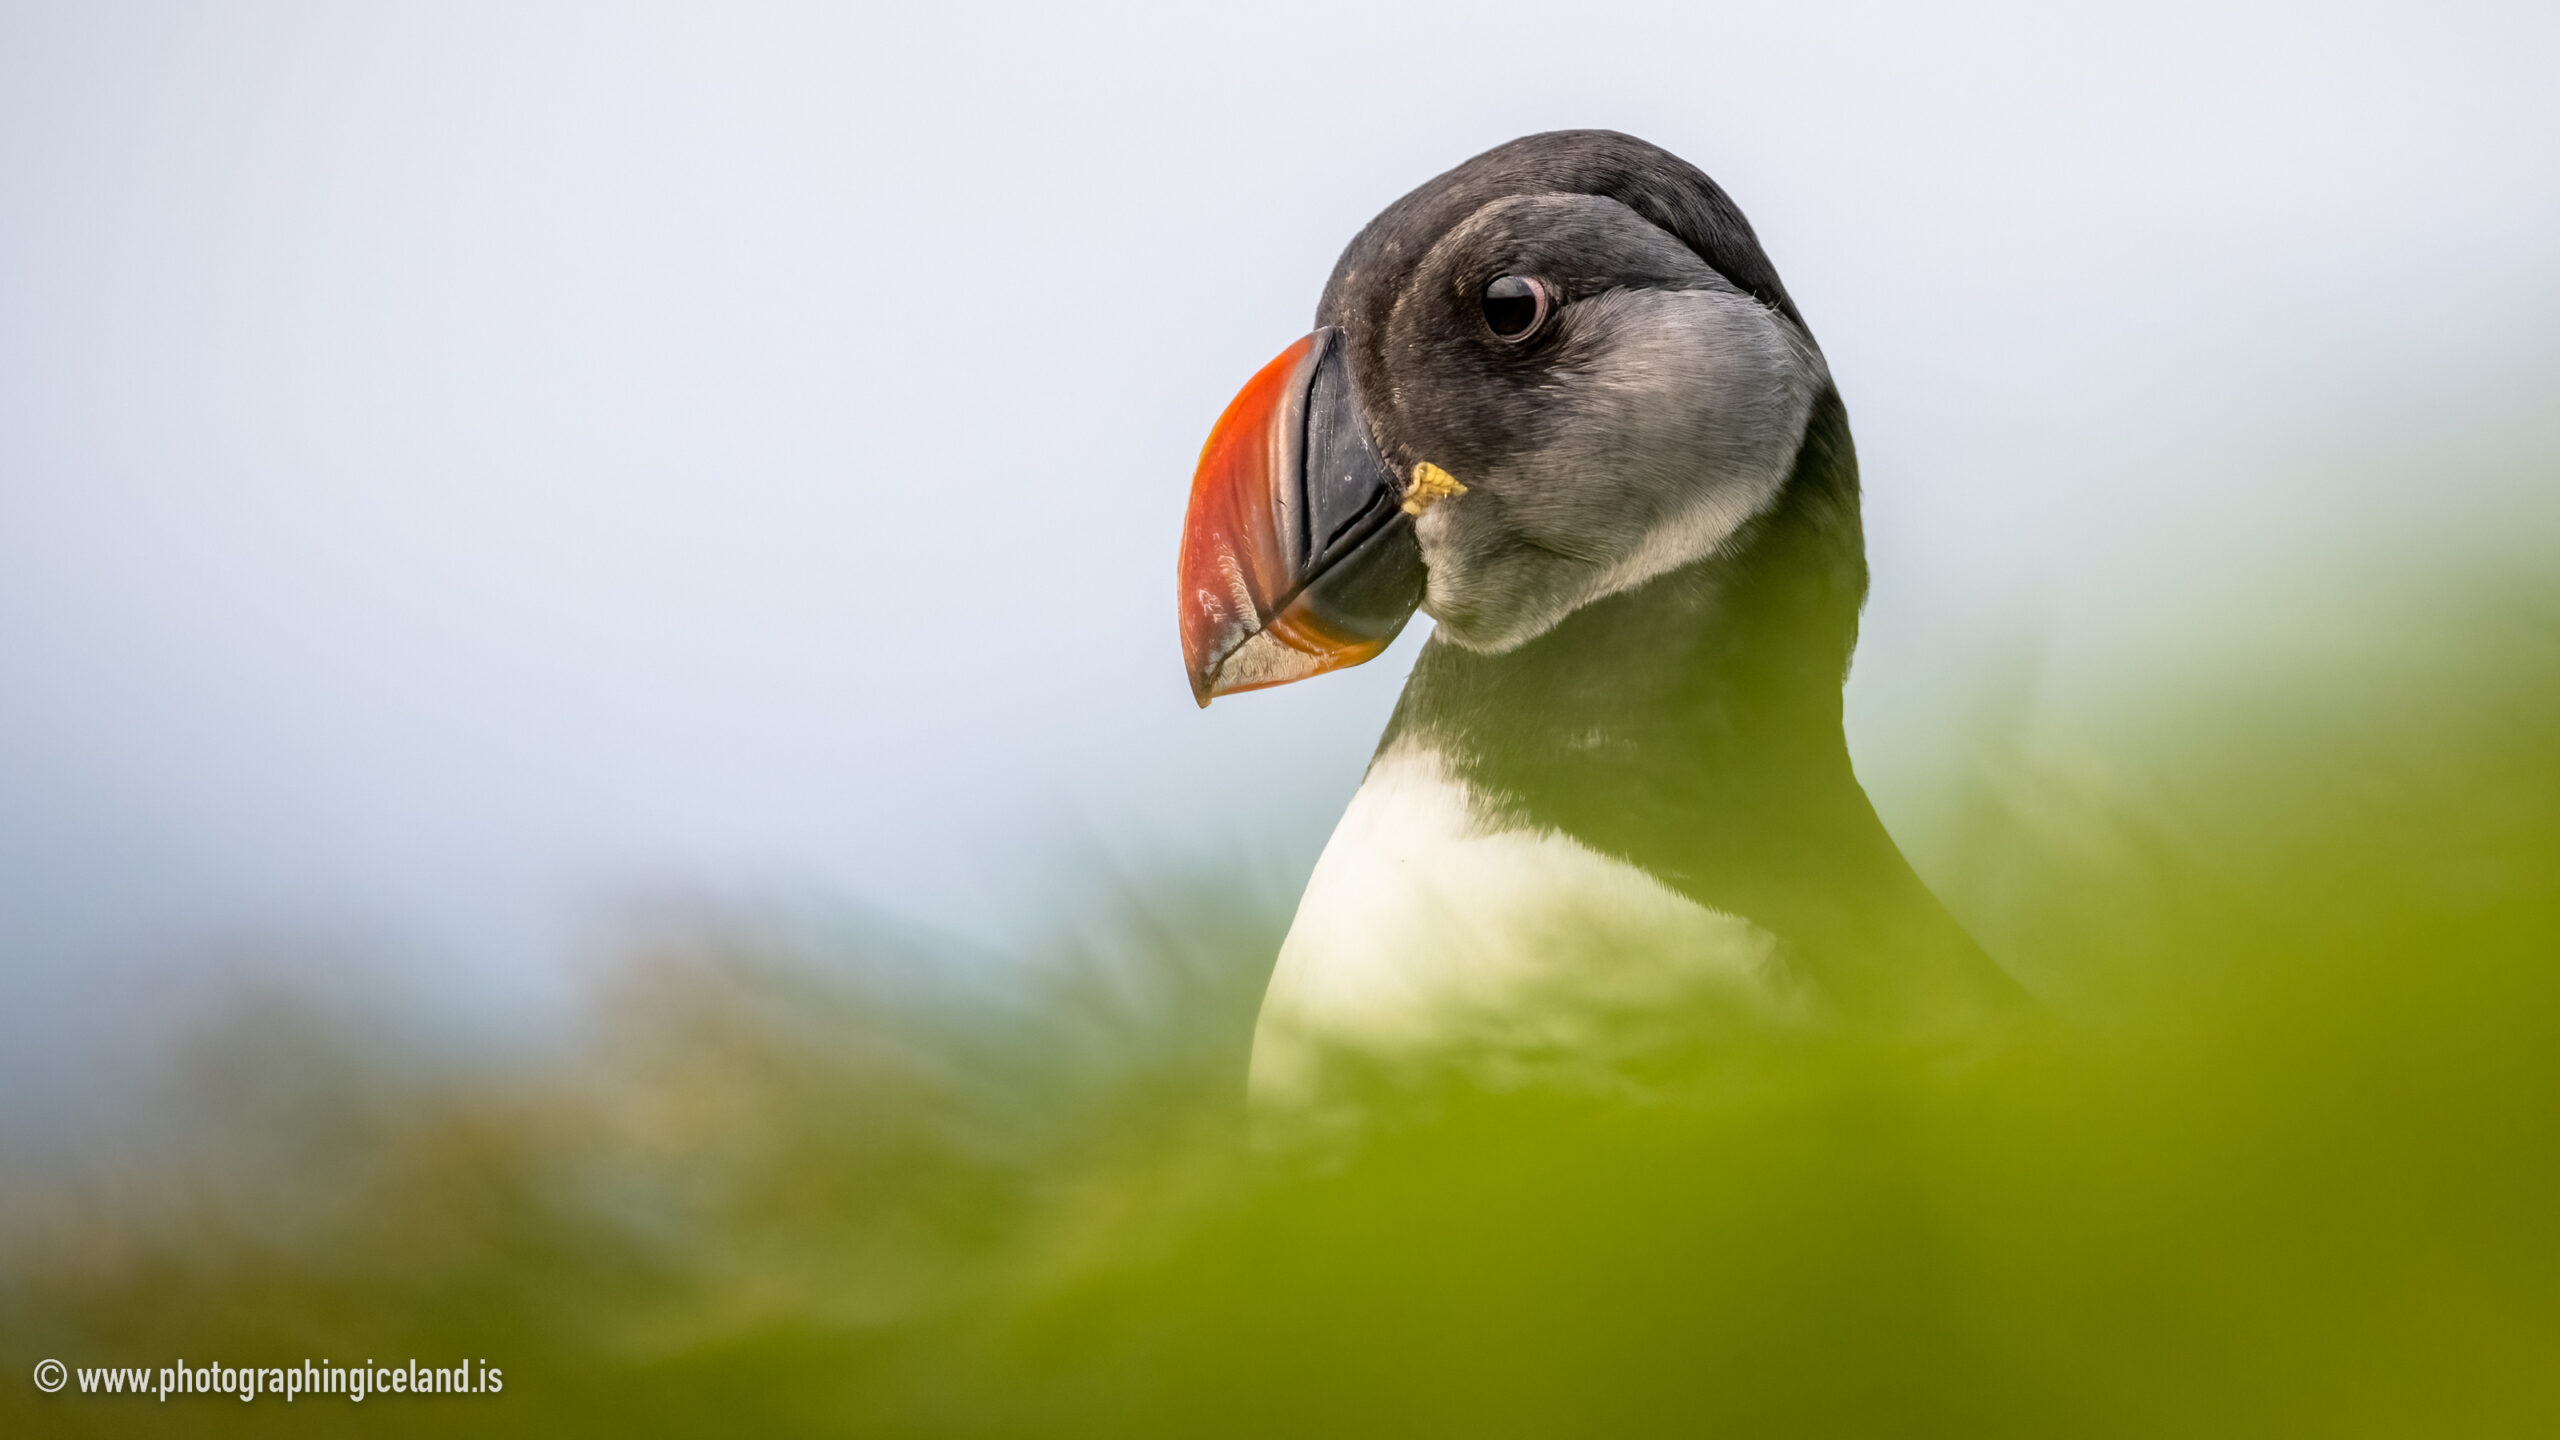 A very special puffin